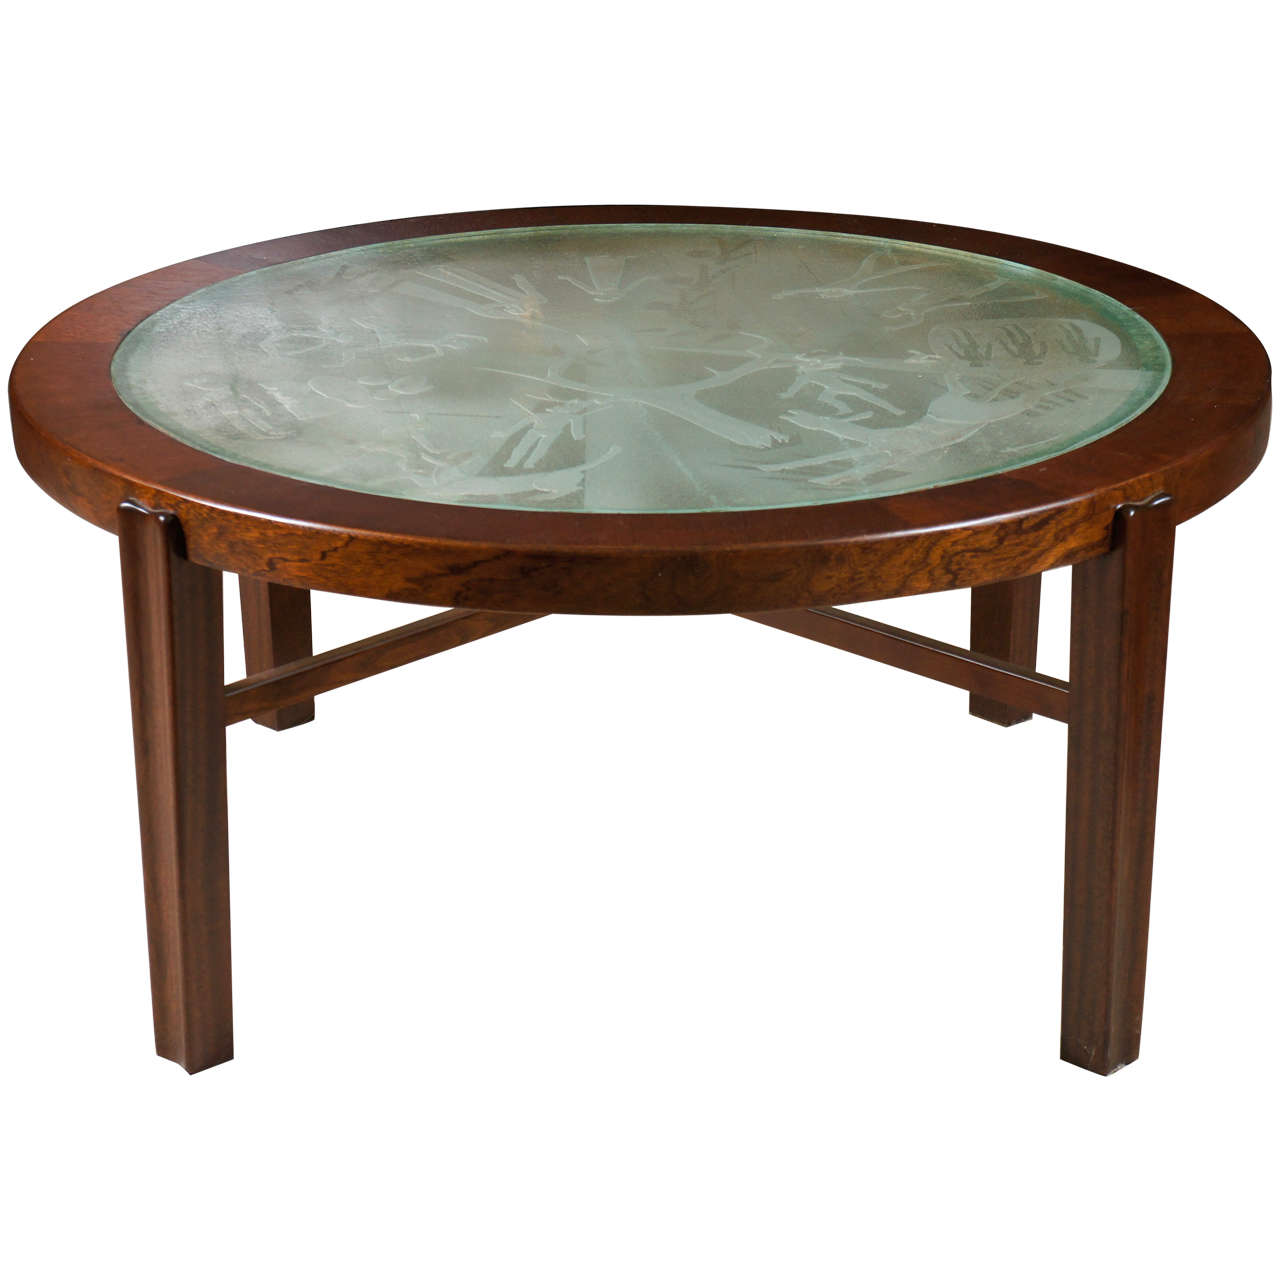 A Fine Swedish Low/Coffee Table with Engraved Glass Top